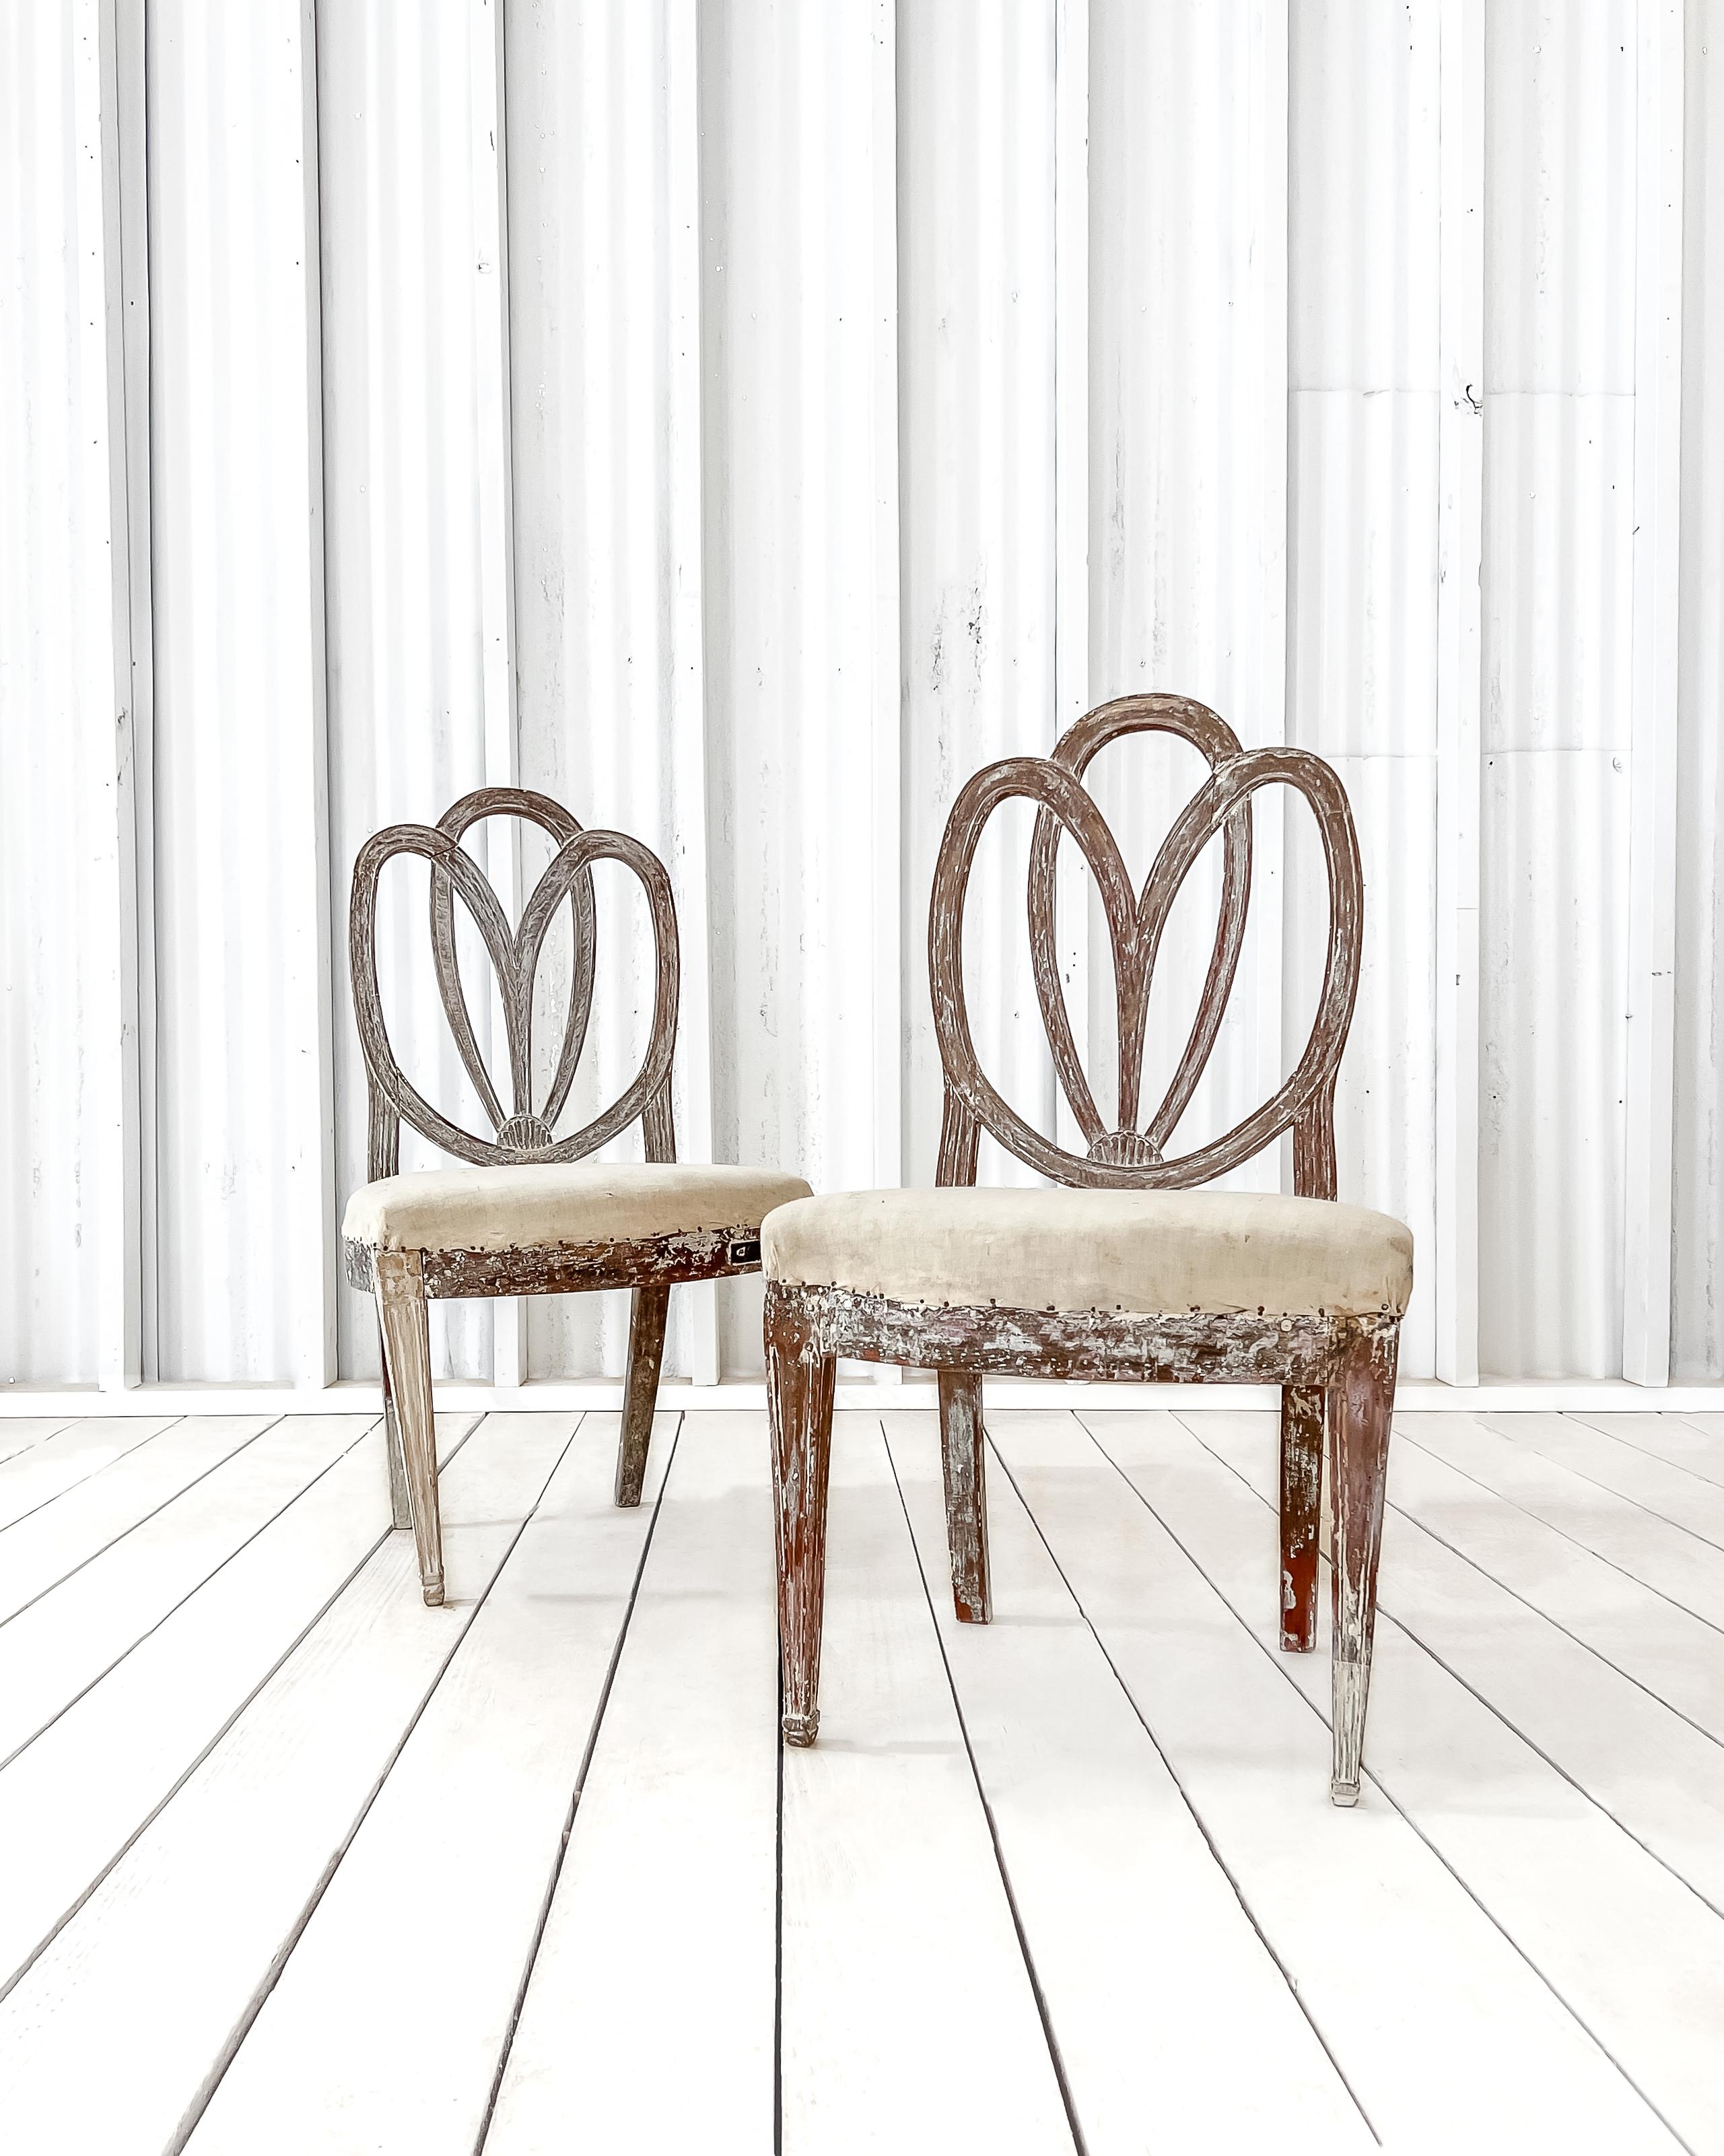 A pair of Swedish Gustavian period side chairs. Crafted from solid wood during the late 18th century, these beautiful chairs feature hand-carved detailing and gracefully curved tulip backs. The body of the chairs has been dry scraped, revealing